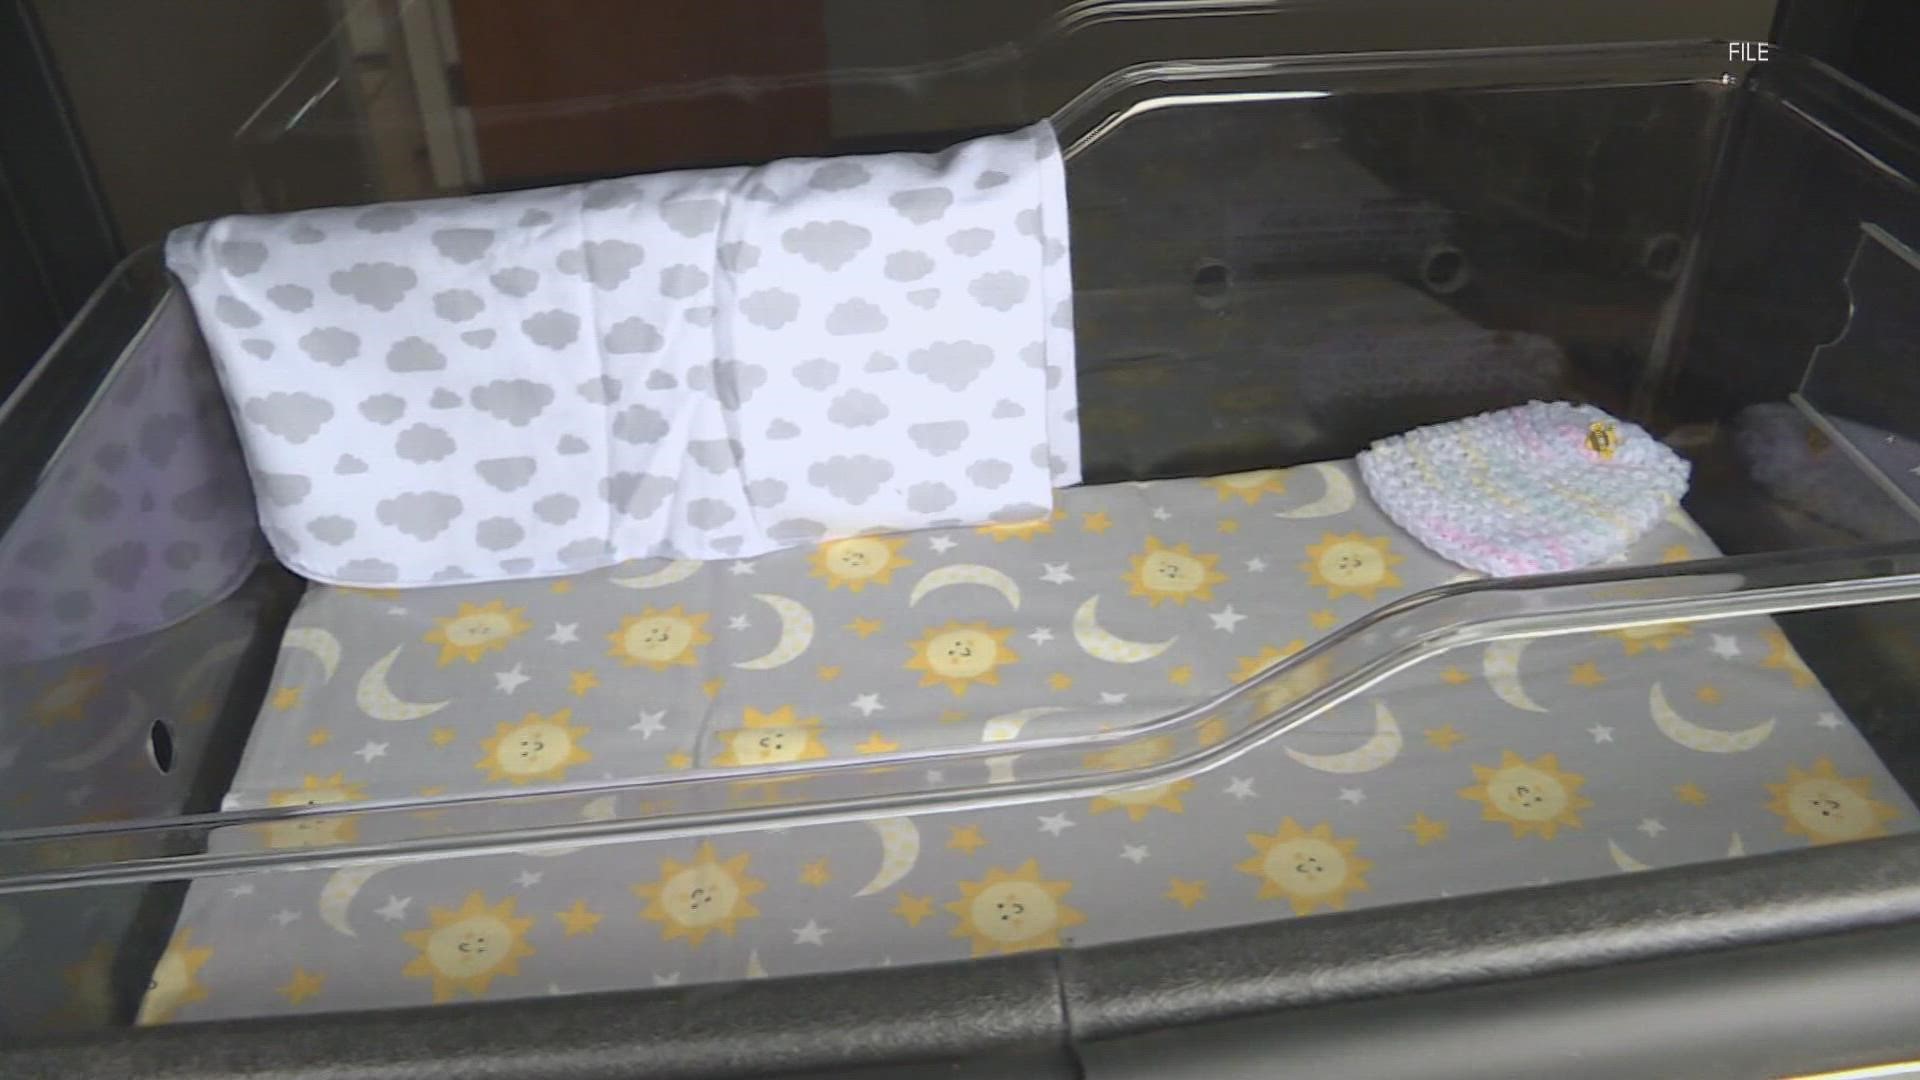 This marks the 20th baby that has been surrendered in Indiana. More than 120 babies have been taken in through the baby boxes nationwide.